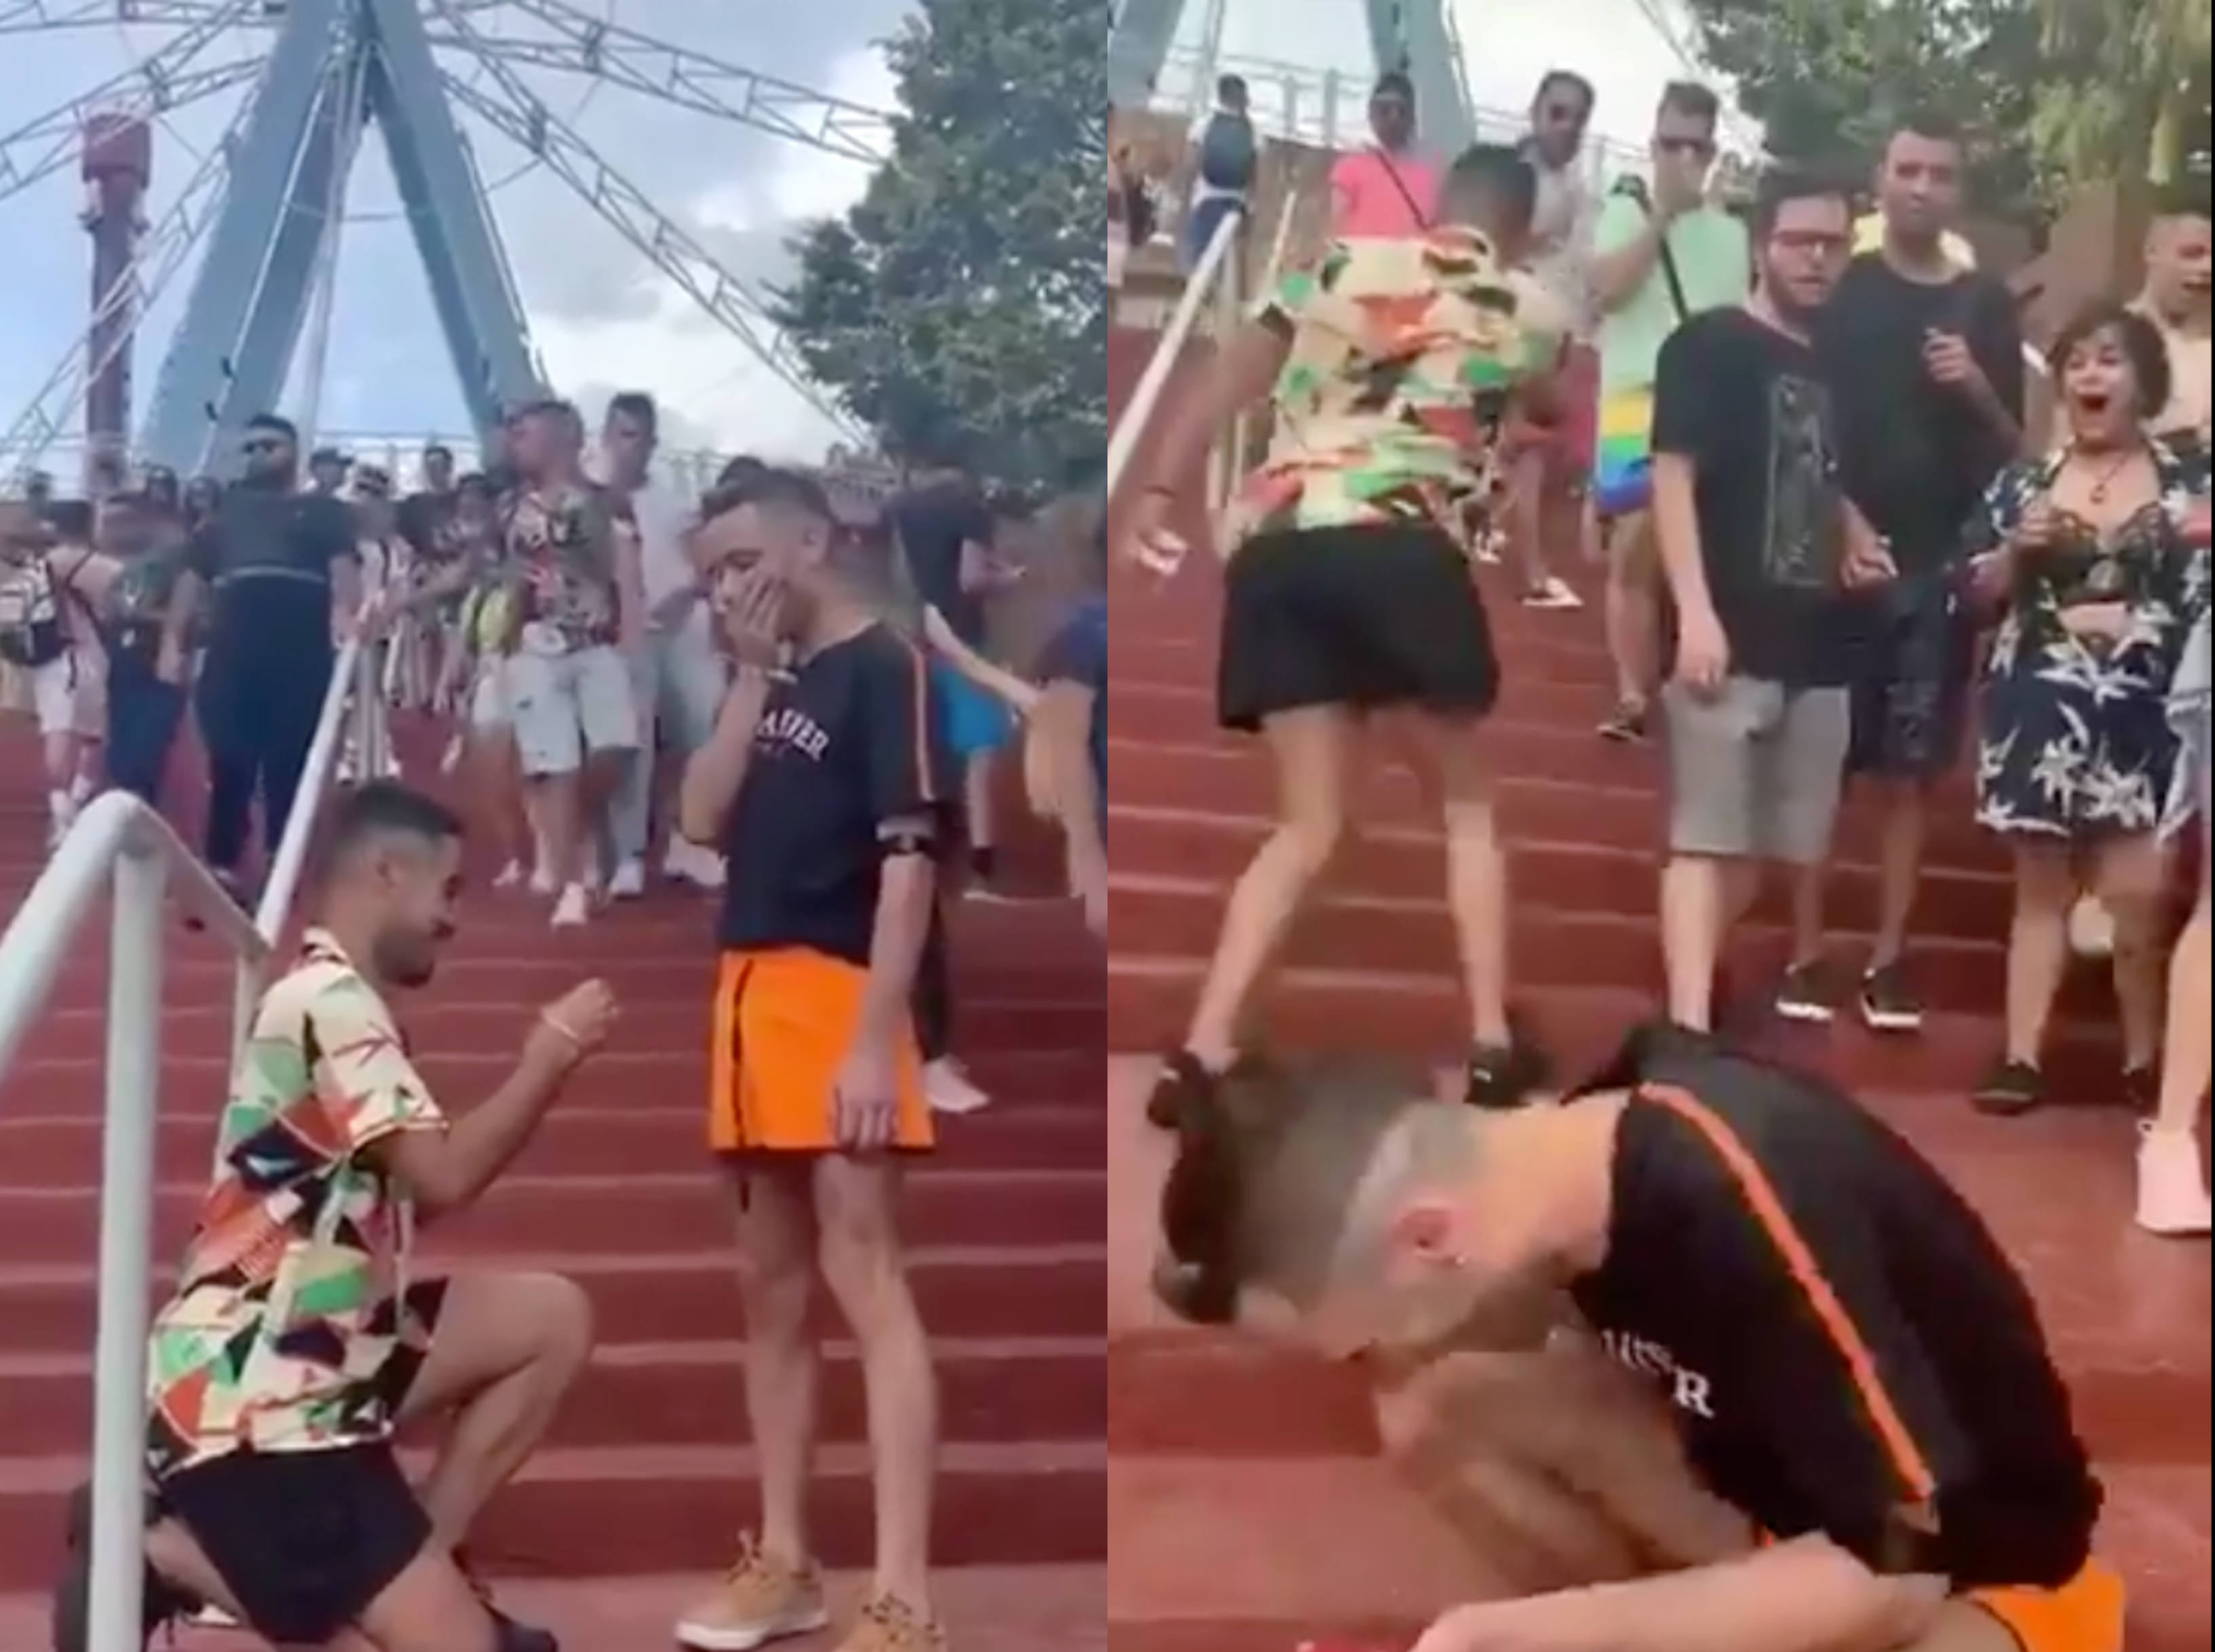 Proposal Gay Porn - Gay couple surprise each other by proposing at same time in viral video